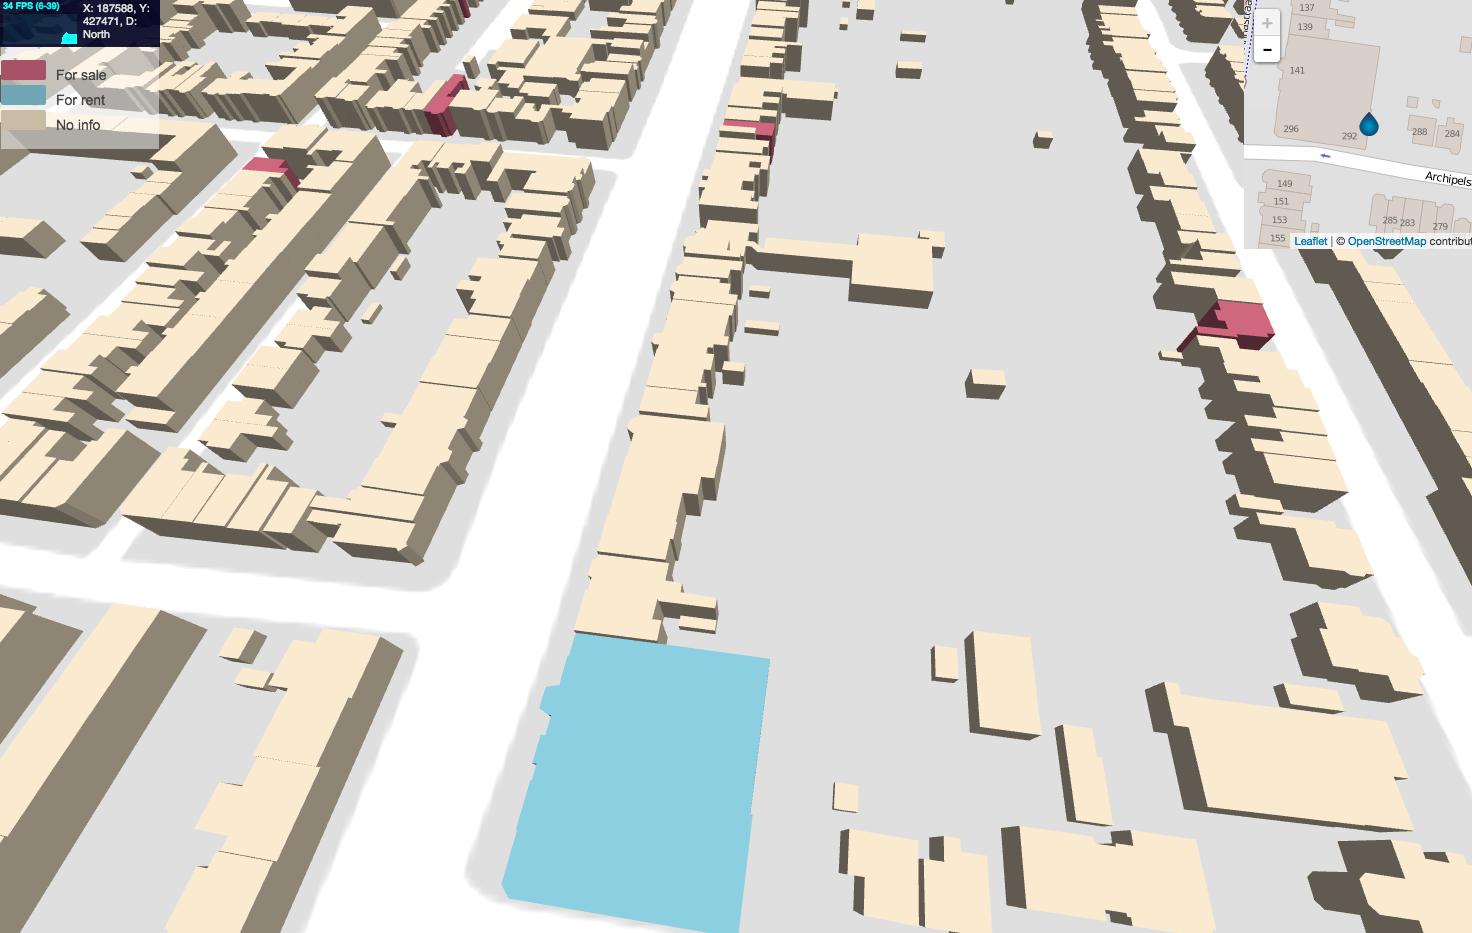 3D data visualization for geospatial analysis using WebGL and Three.js